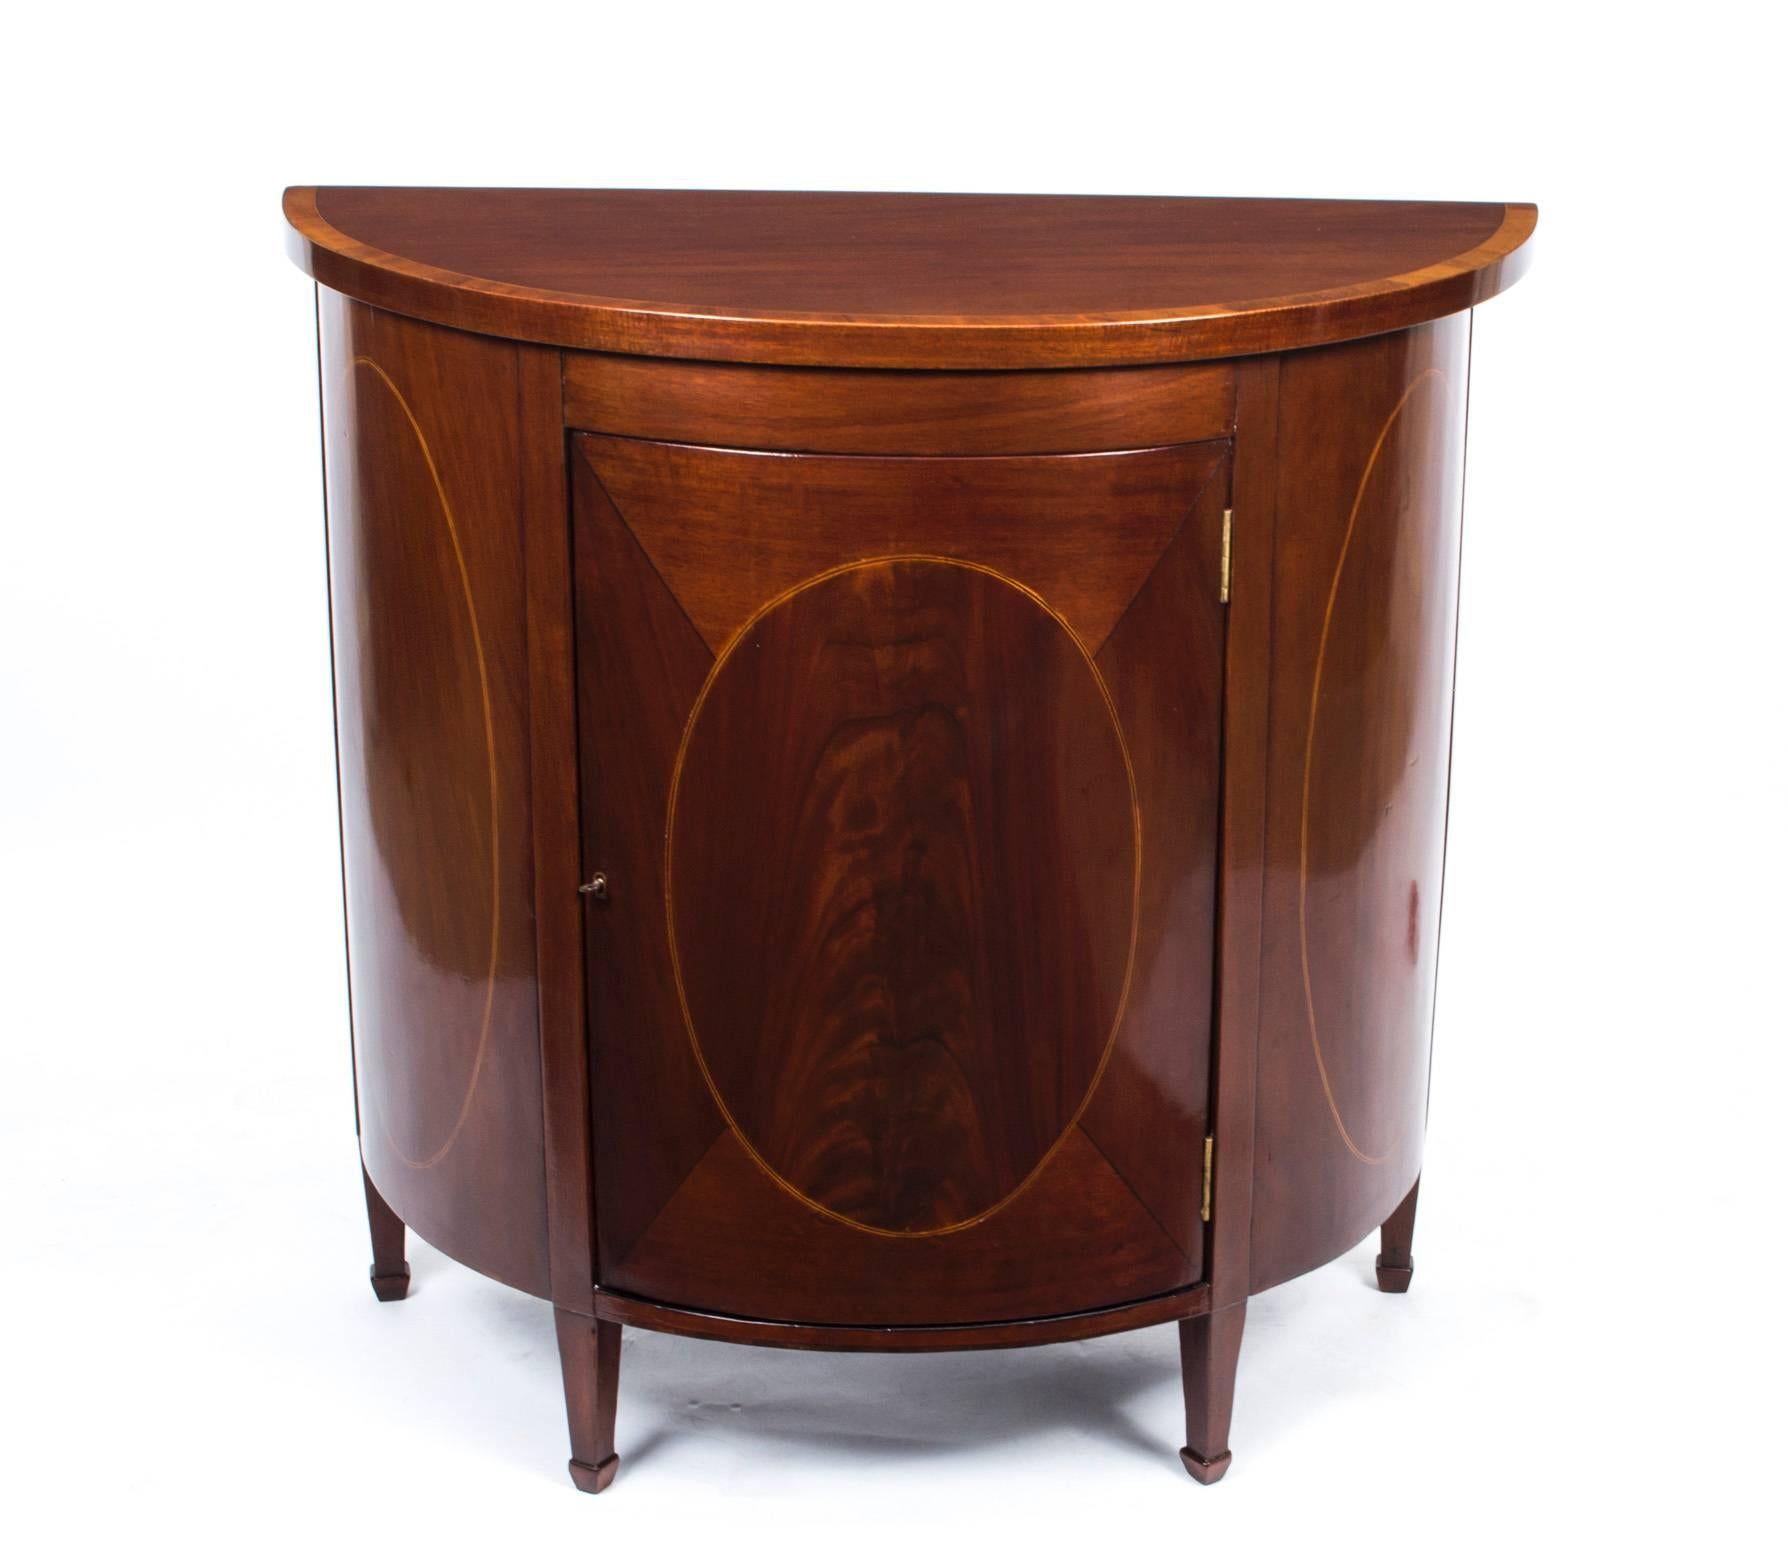 This is a lovely antique Victorian half-moon commode in beautiful Sheraton style. There is no mistaking the unique quality and design and it will soon become the centerpiece of your furniture collection. This lovely commode will instantly enhance